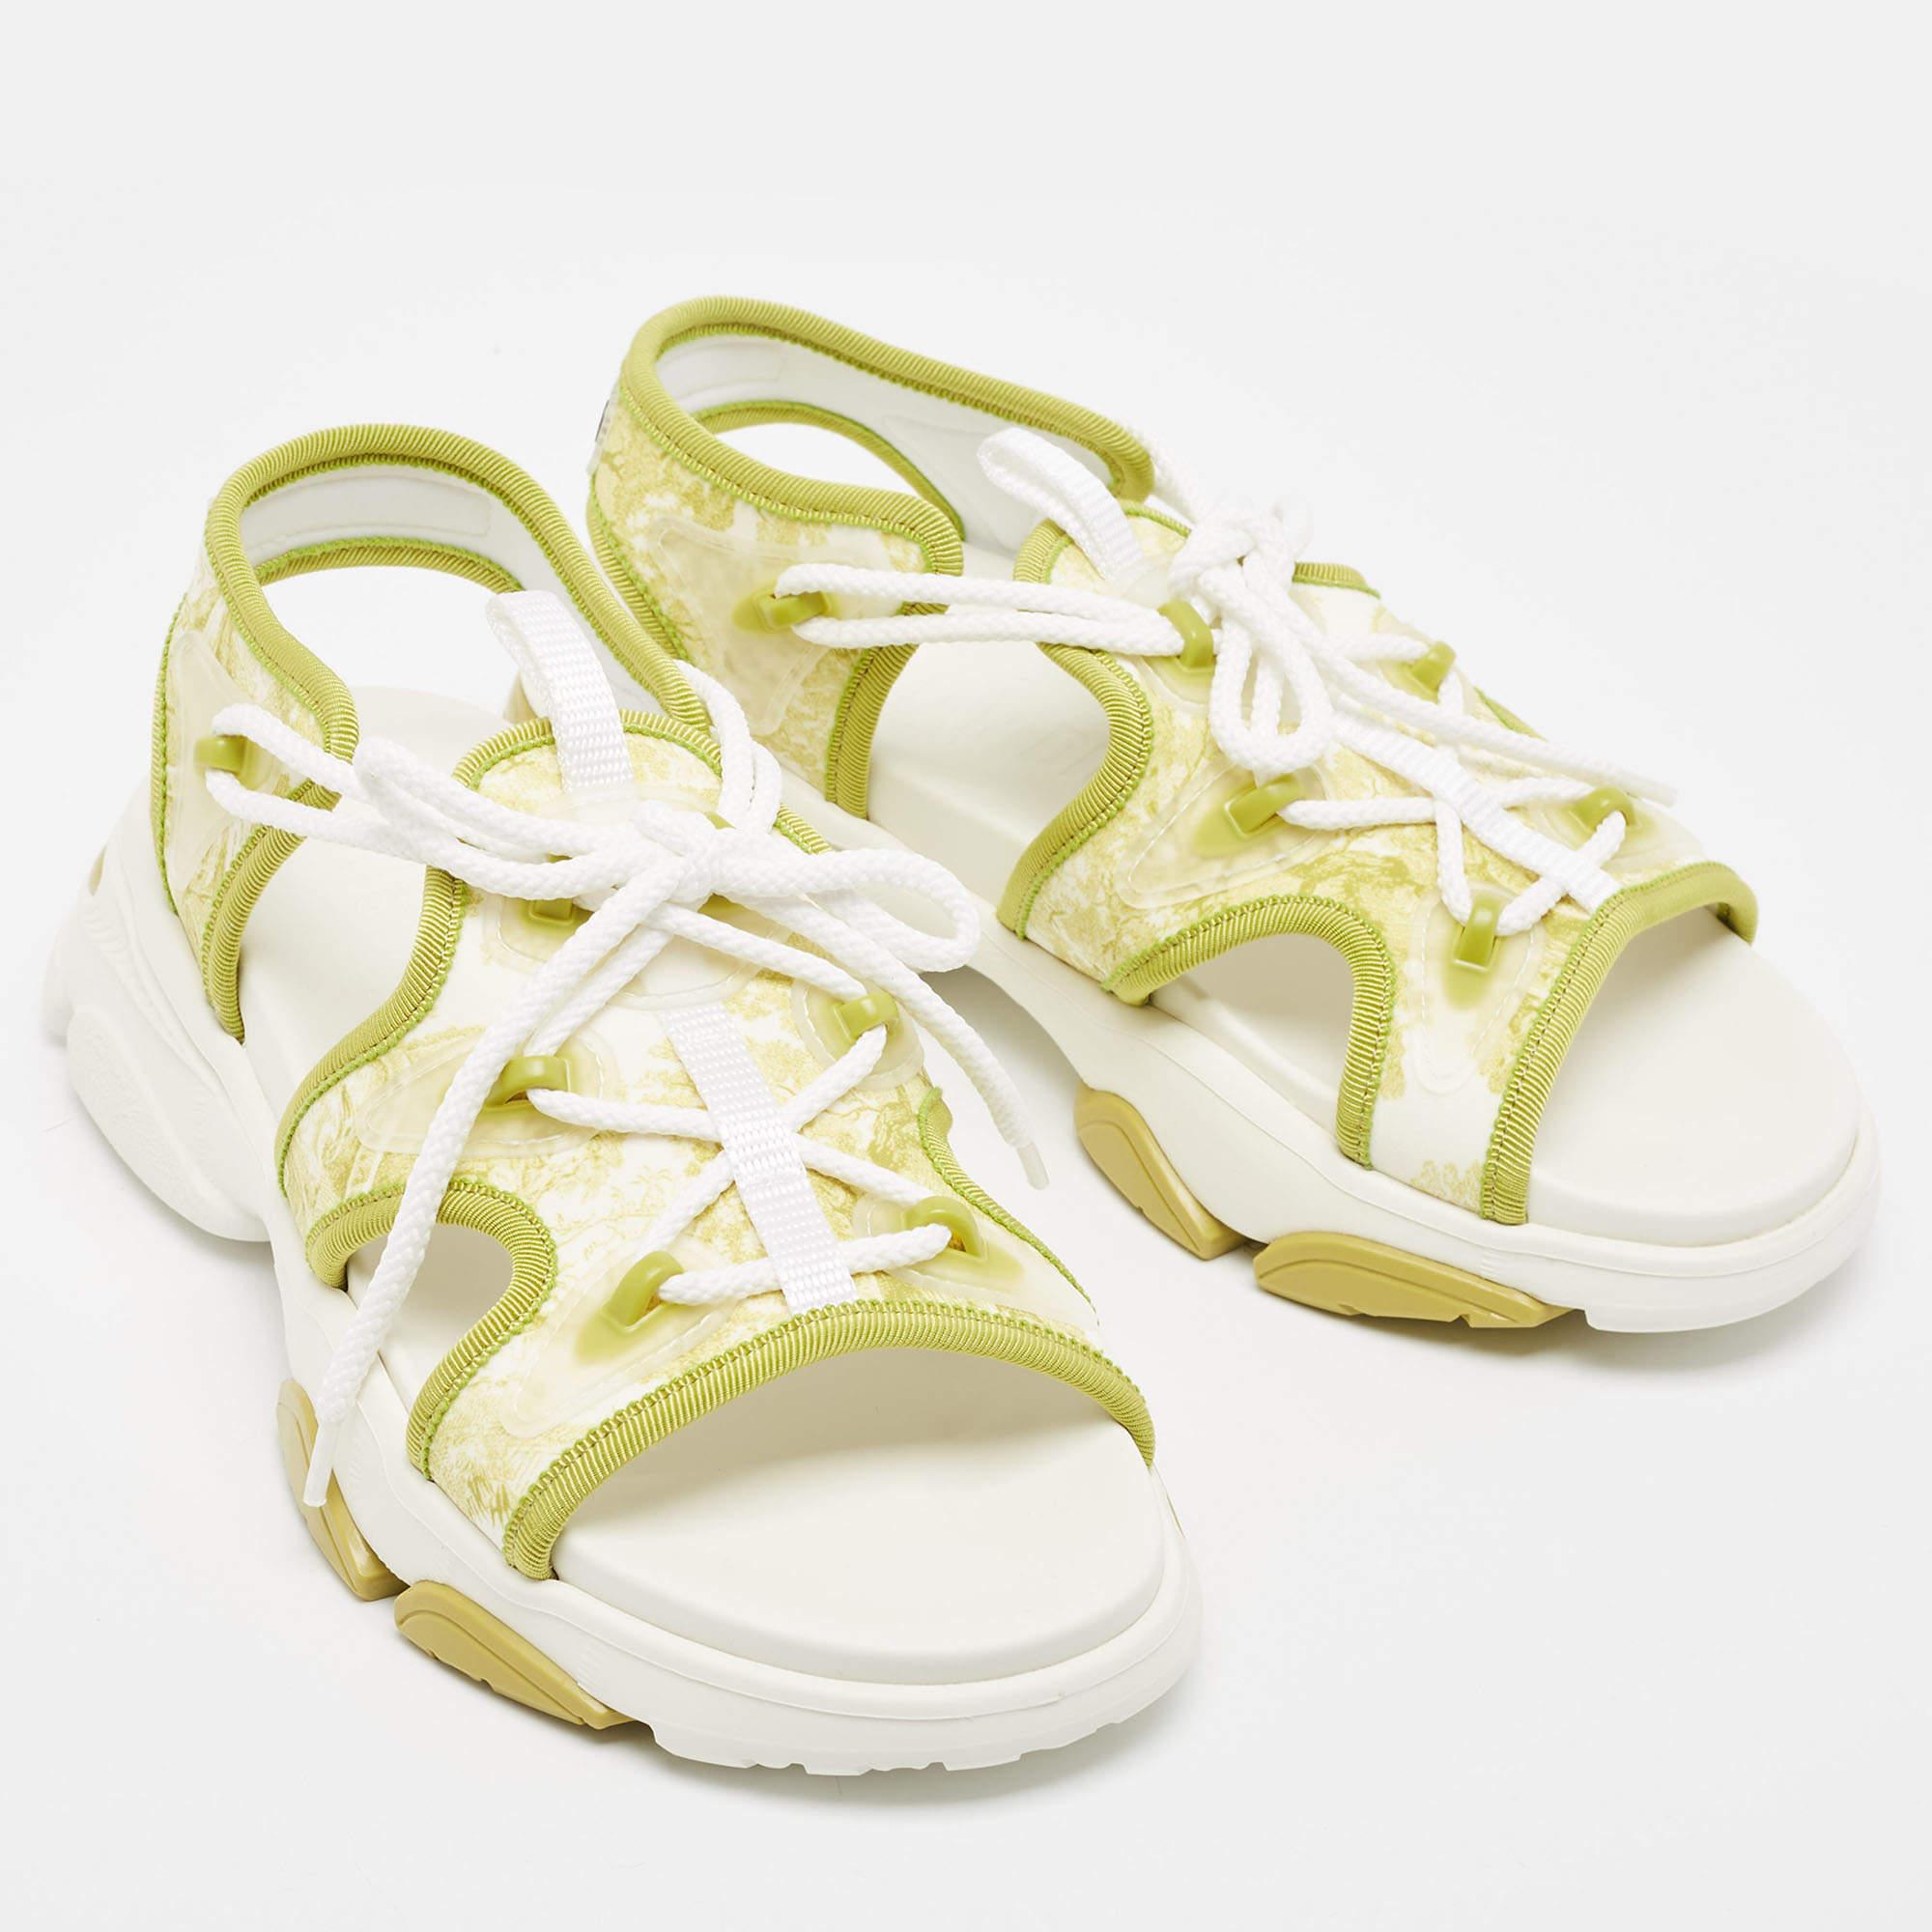 Dior Green/White Neoprene and PVC D-Connect Sandals Size 36.5 1